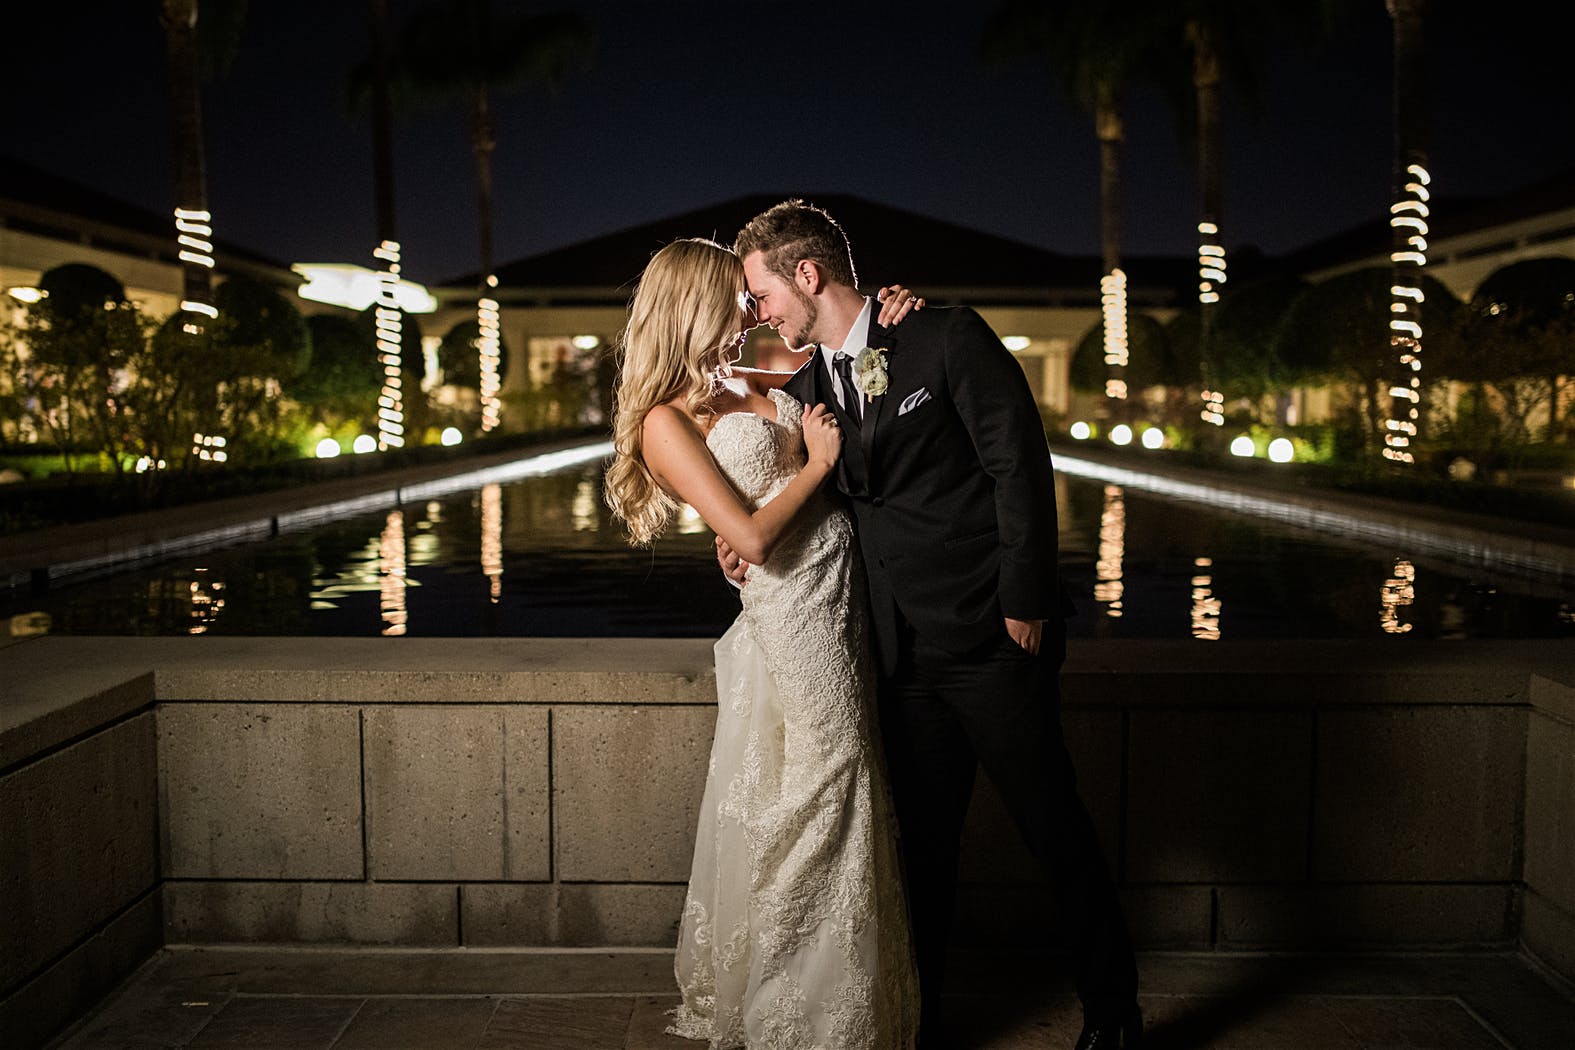 Bride and Groom cuddle up for night photos in front of the reflecting pool at The Richard Nixon Library wedding venue in Yorba Linda.